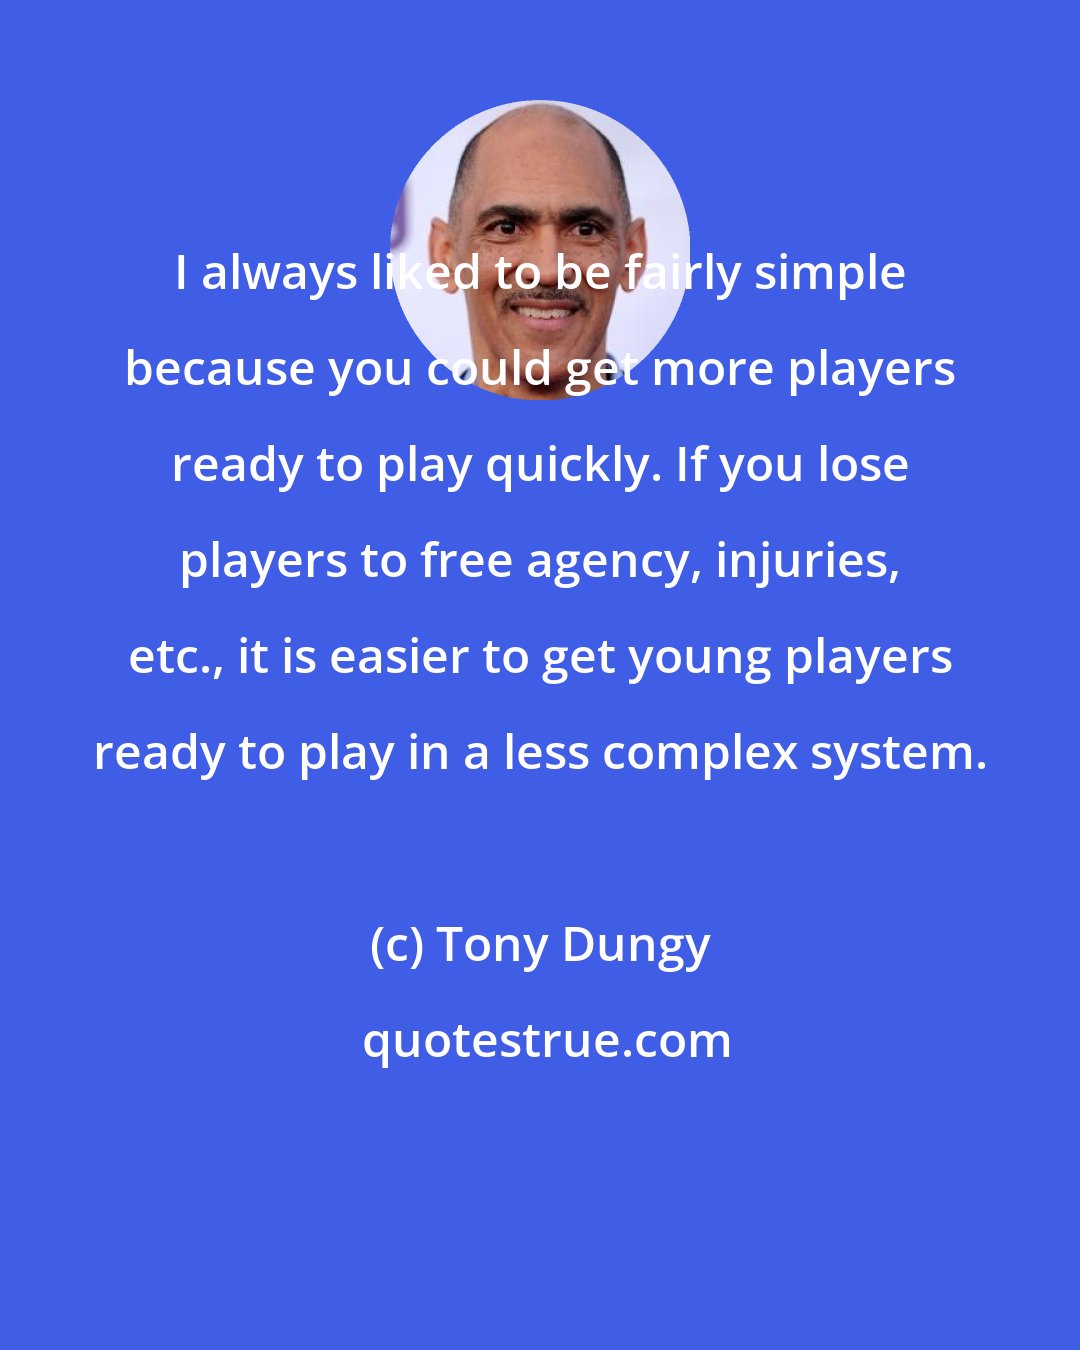 Tony Dungy: I always liked to be fairly simple because you could get more players ready to play quickly. If you lose players to free agency, injuries, etc., it is easier to get young players ready to play in a less complex system.